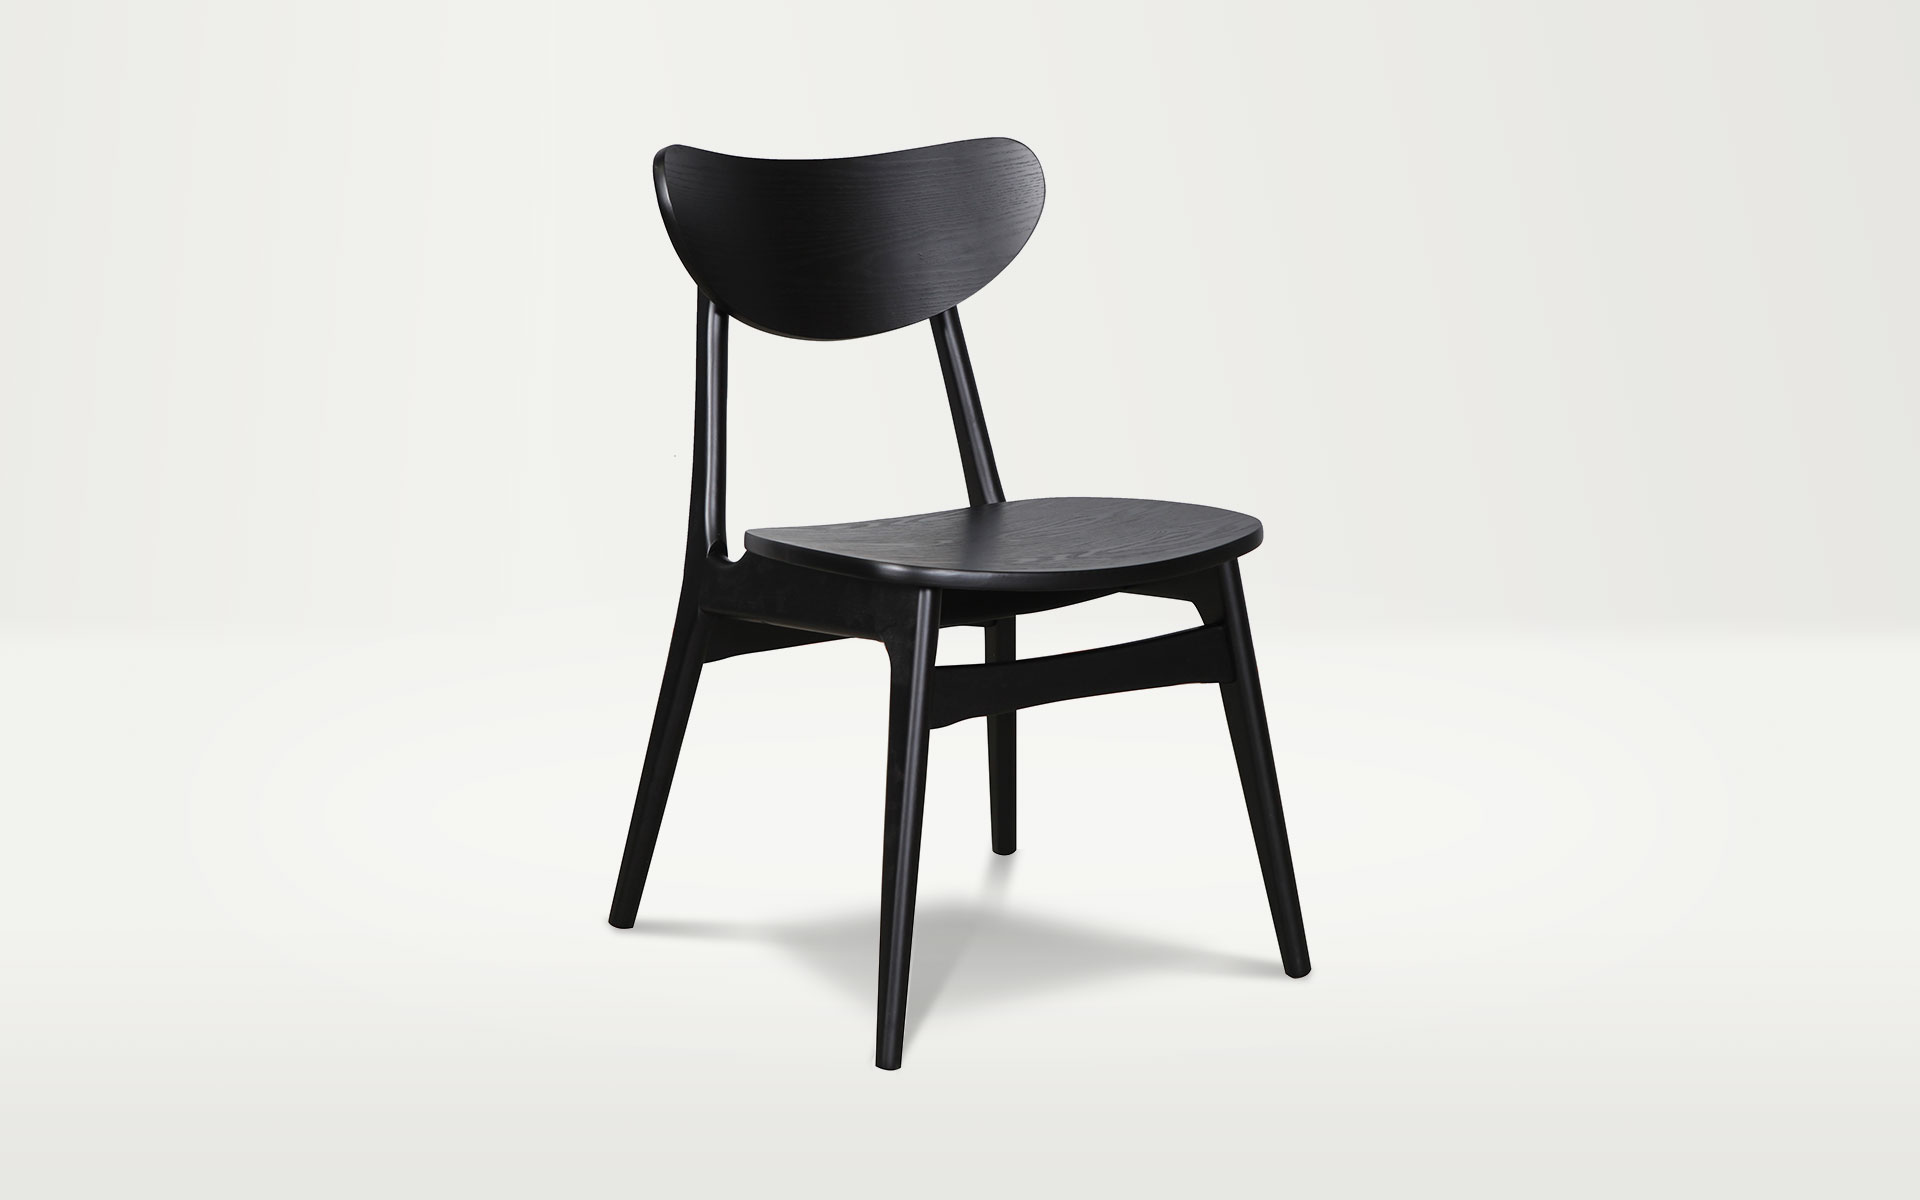 02 Finland Chair Black - Finland Dining Chair - Natural/Black